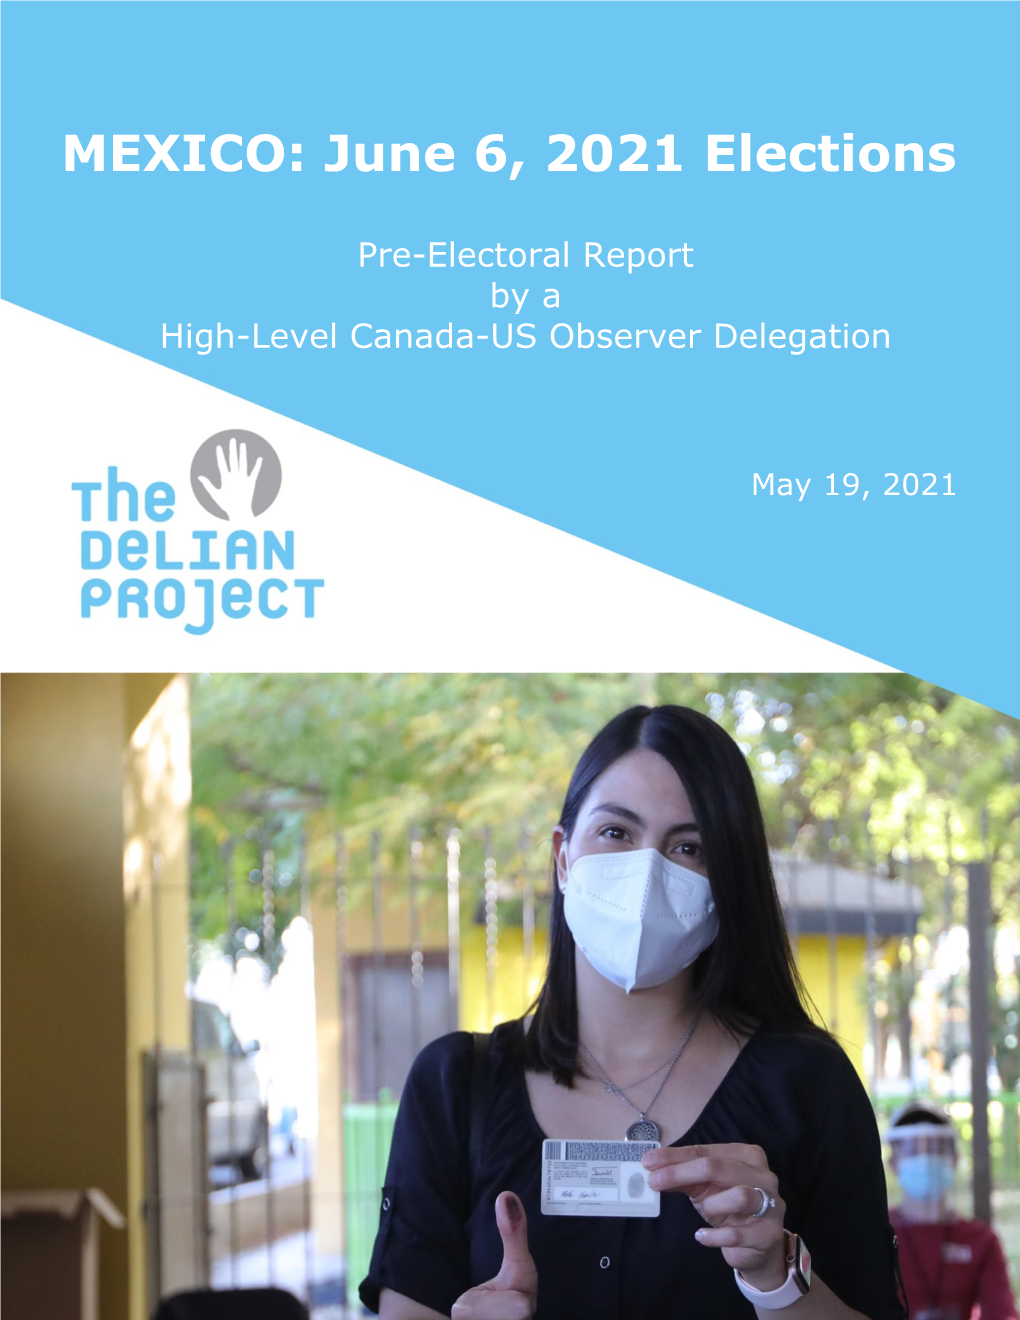 MEXICO: June 6, 2021 Elections